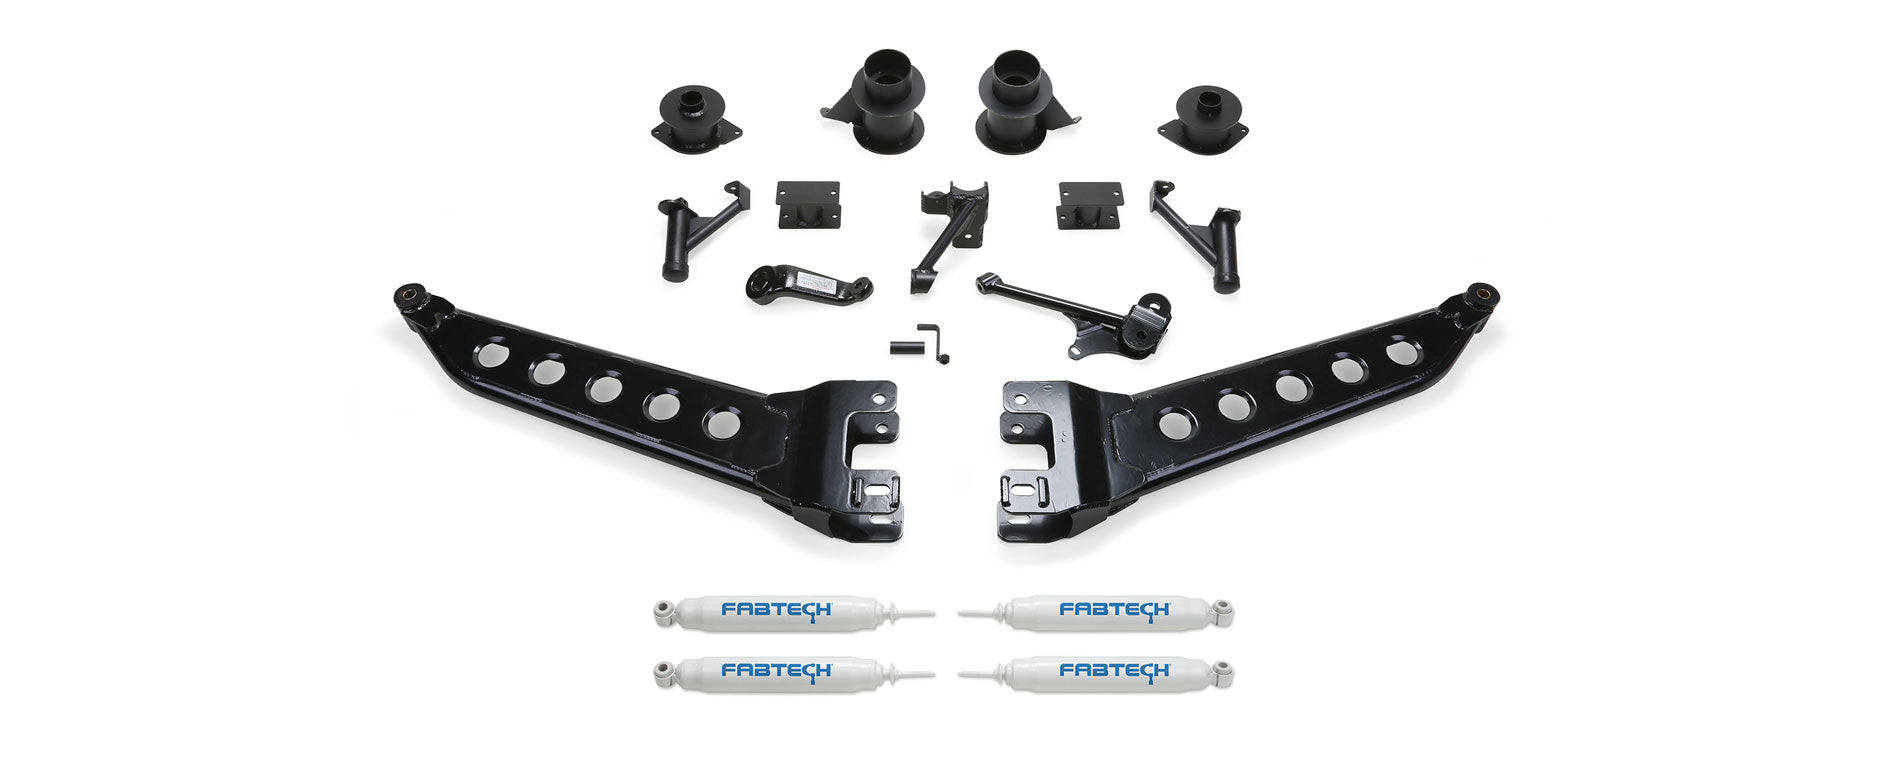 Fabtech FTS23055 5in. RADIUS ARM KIT W/PERF SHKS